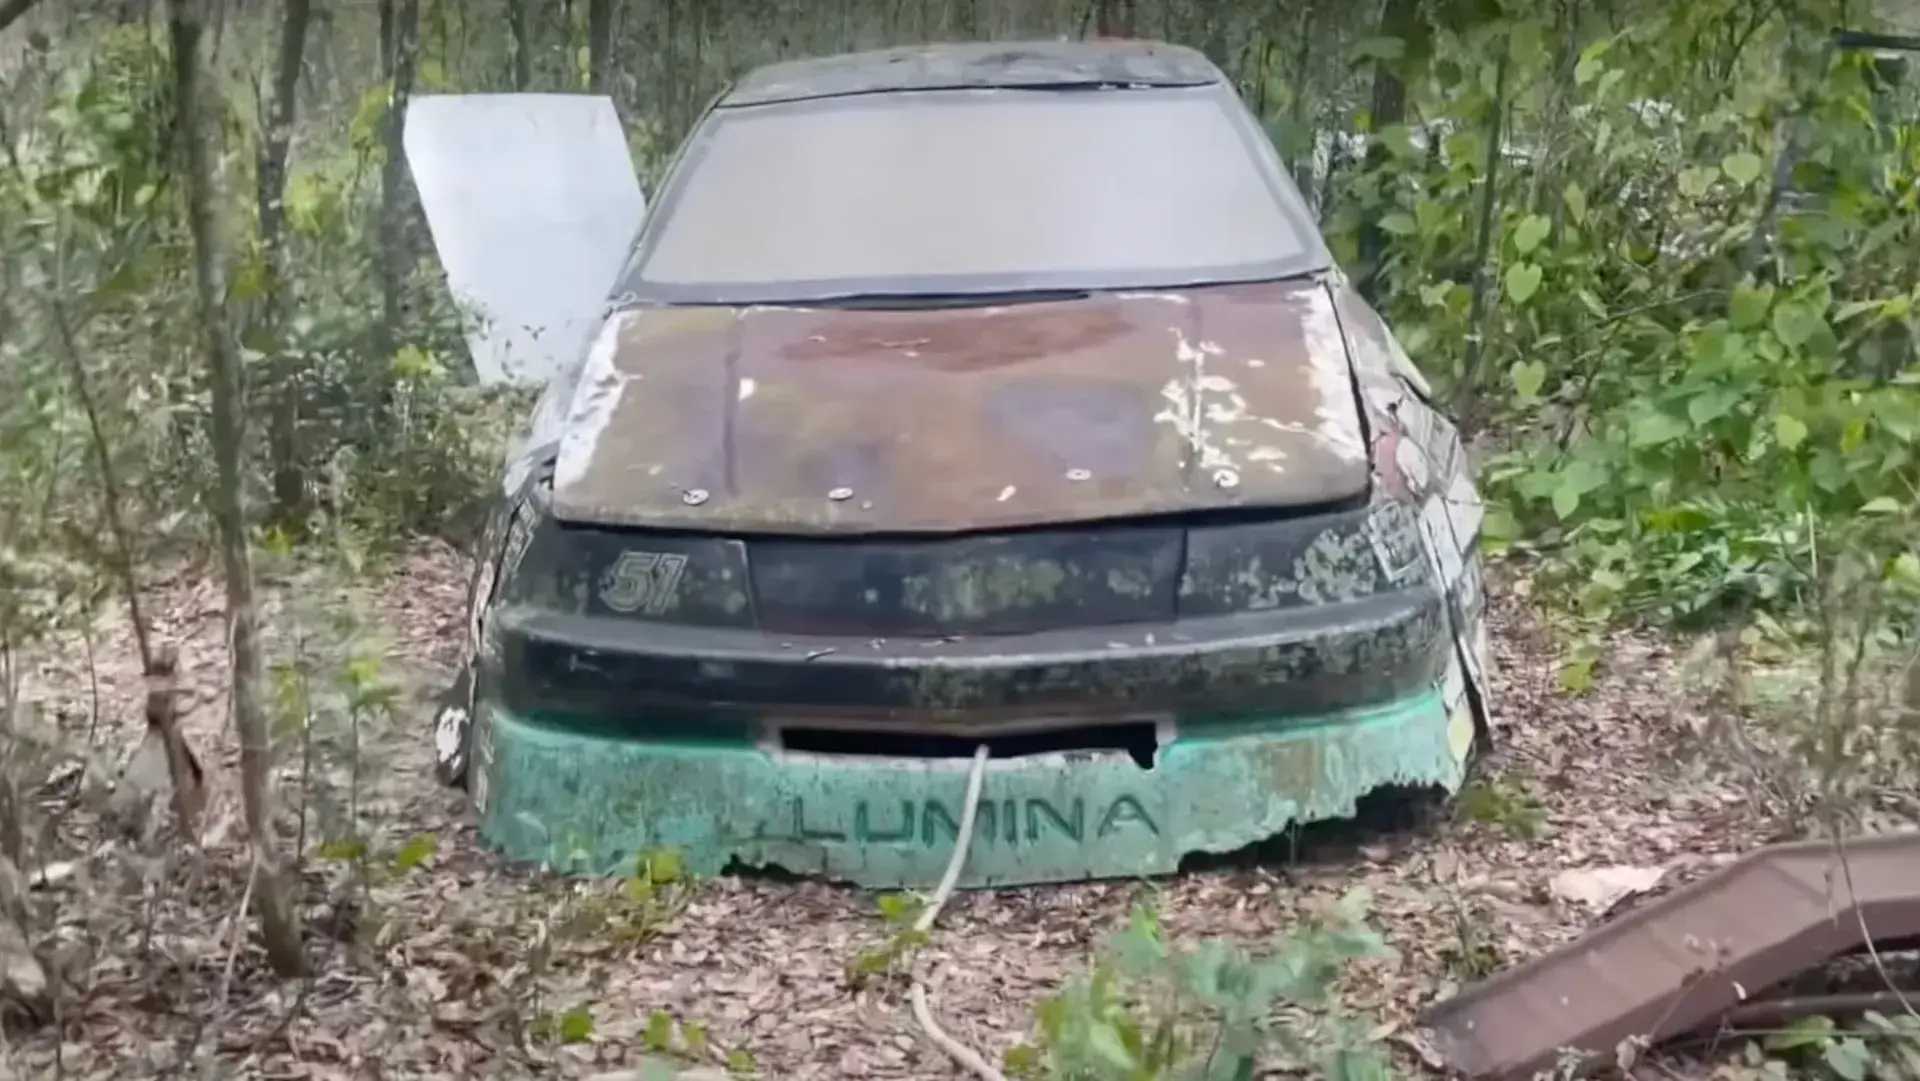 A forest harbors decaying race cars from the days of thunder 1